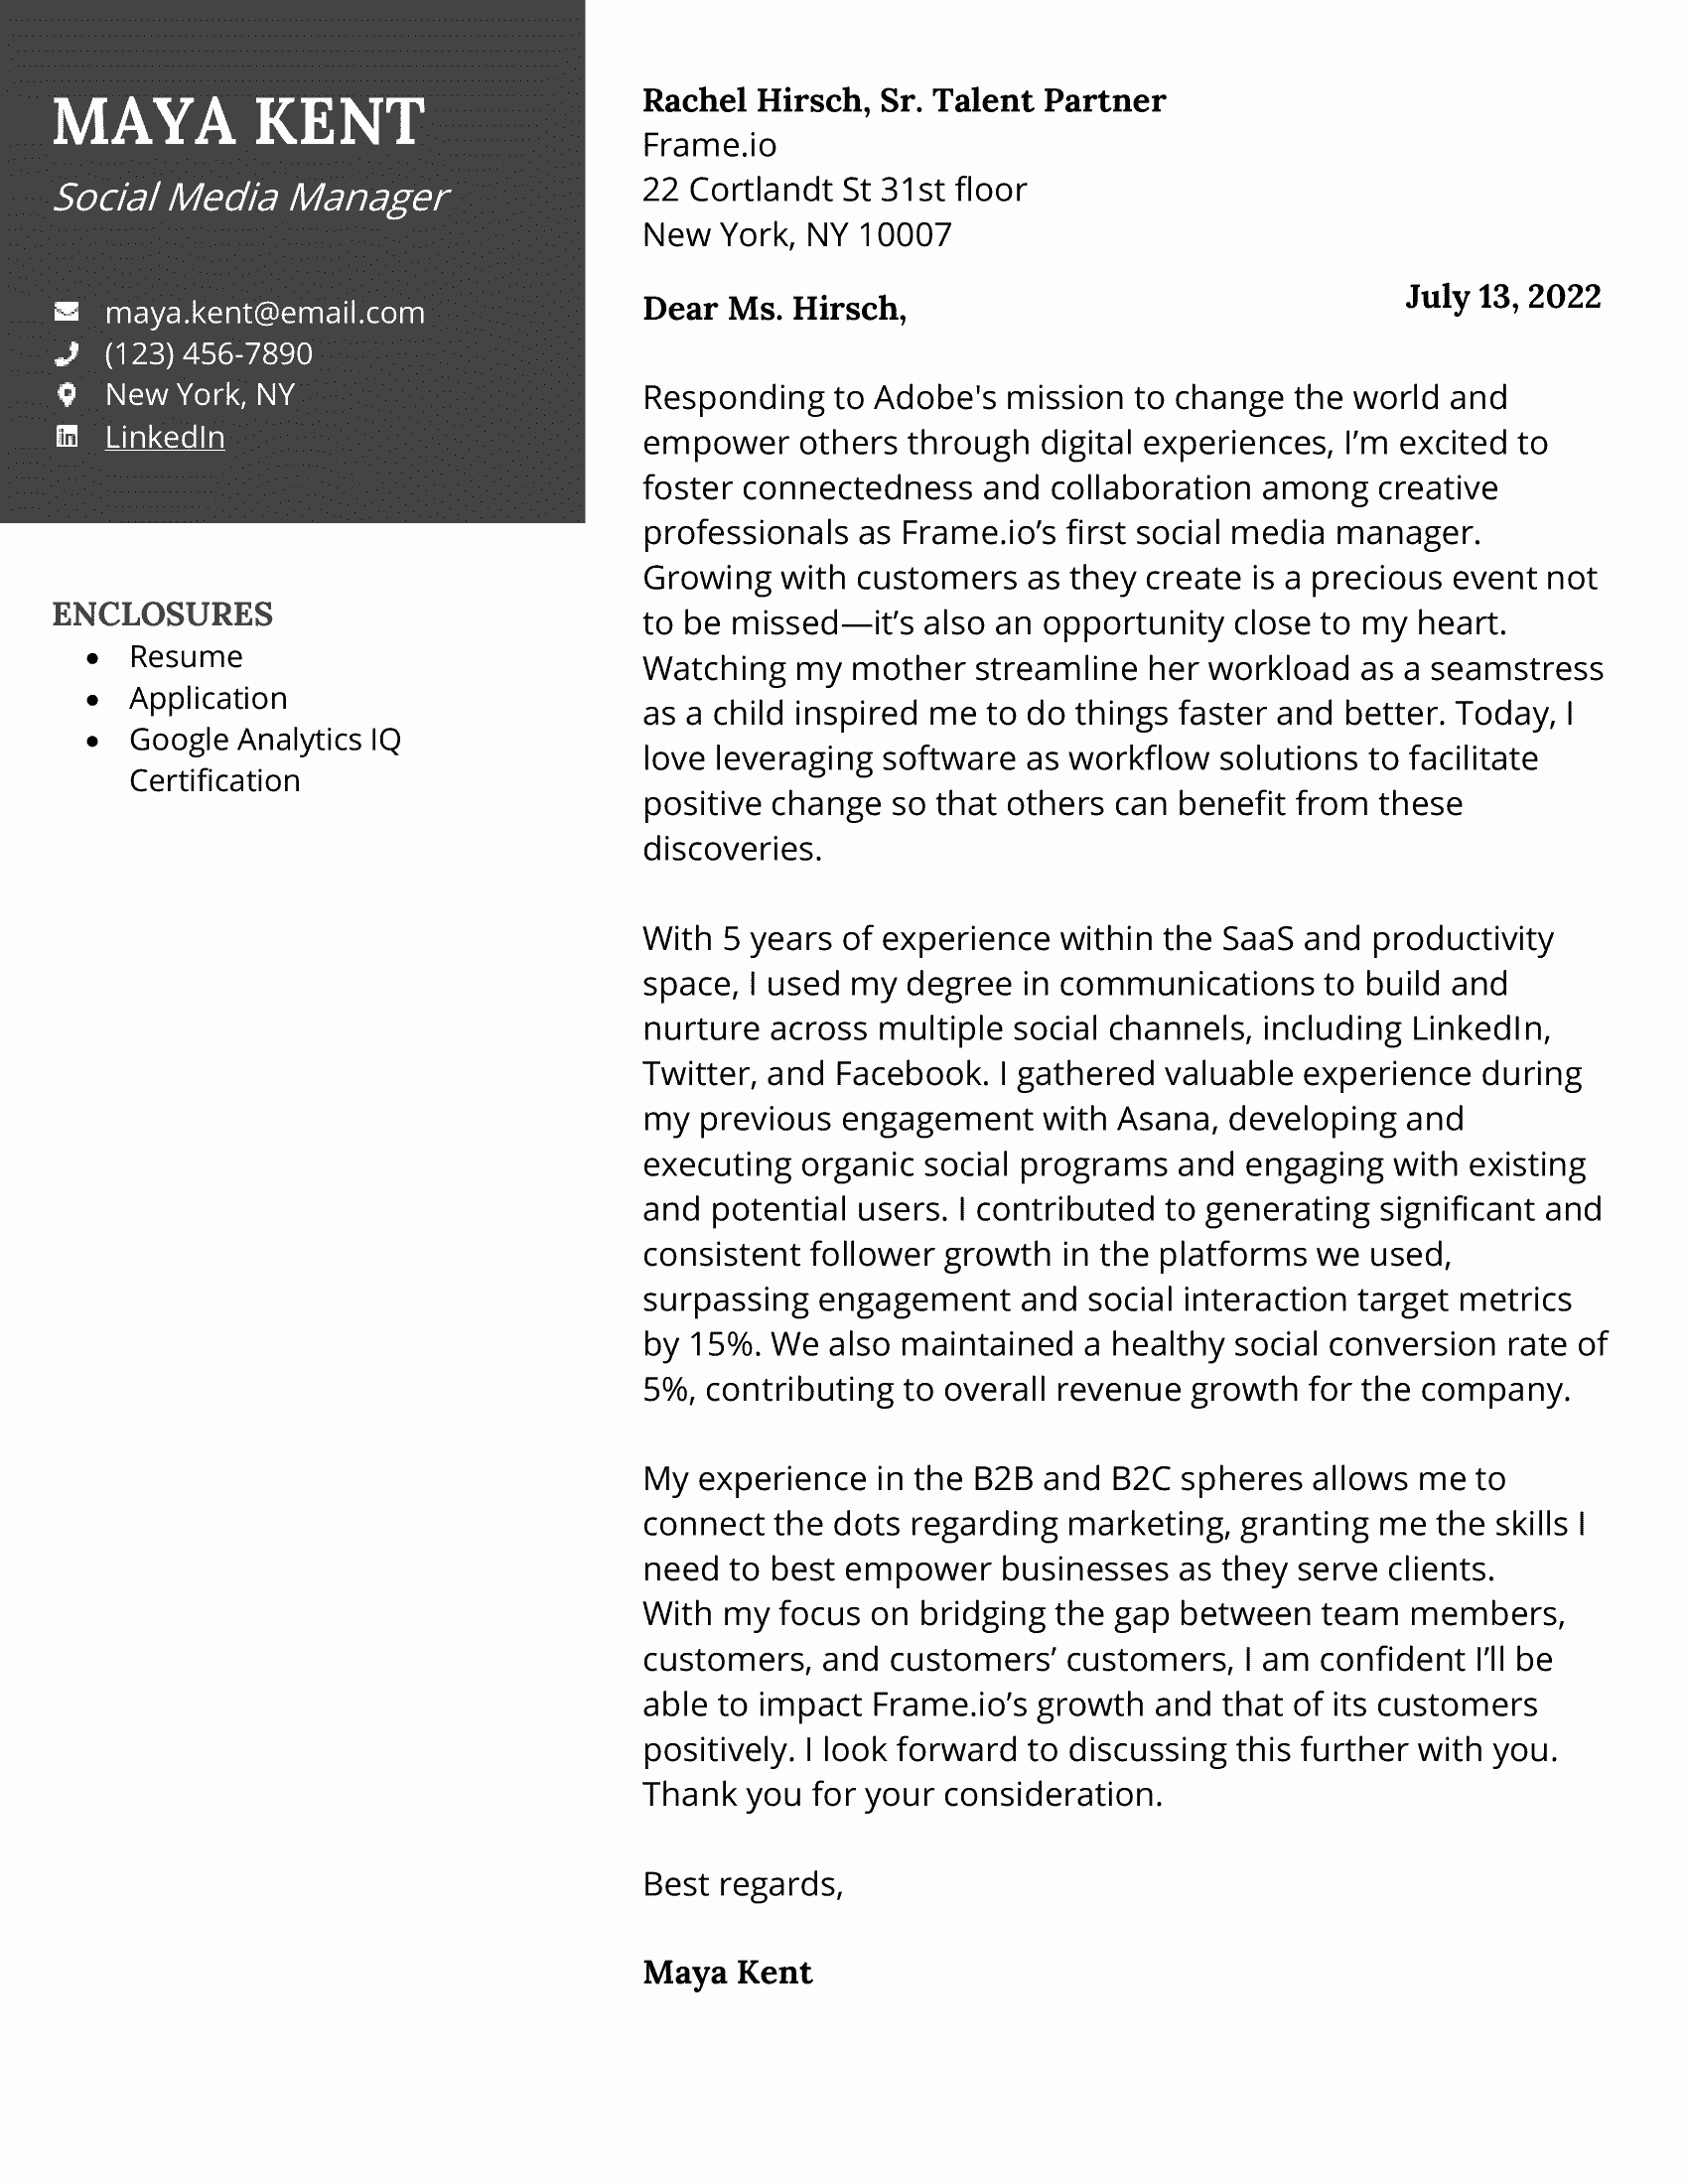 Social media manager cover letter with black contact header